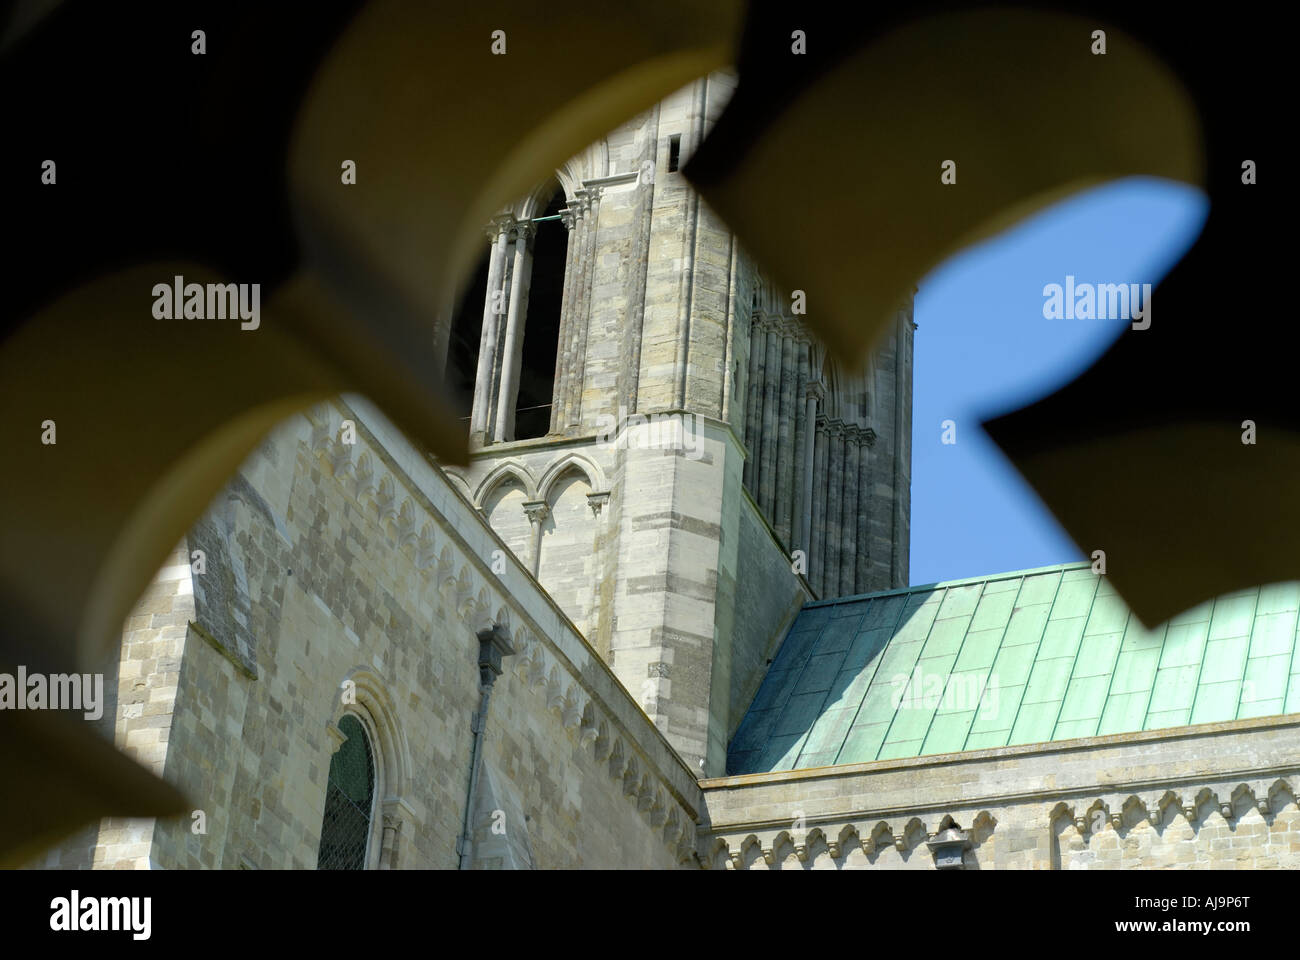 Detail of Chichester cathedral spire viewed from cloister through window Stock Photo